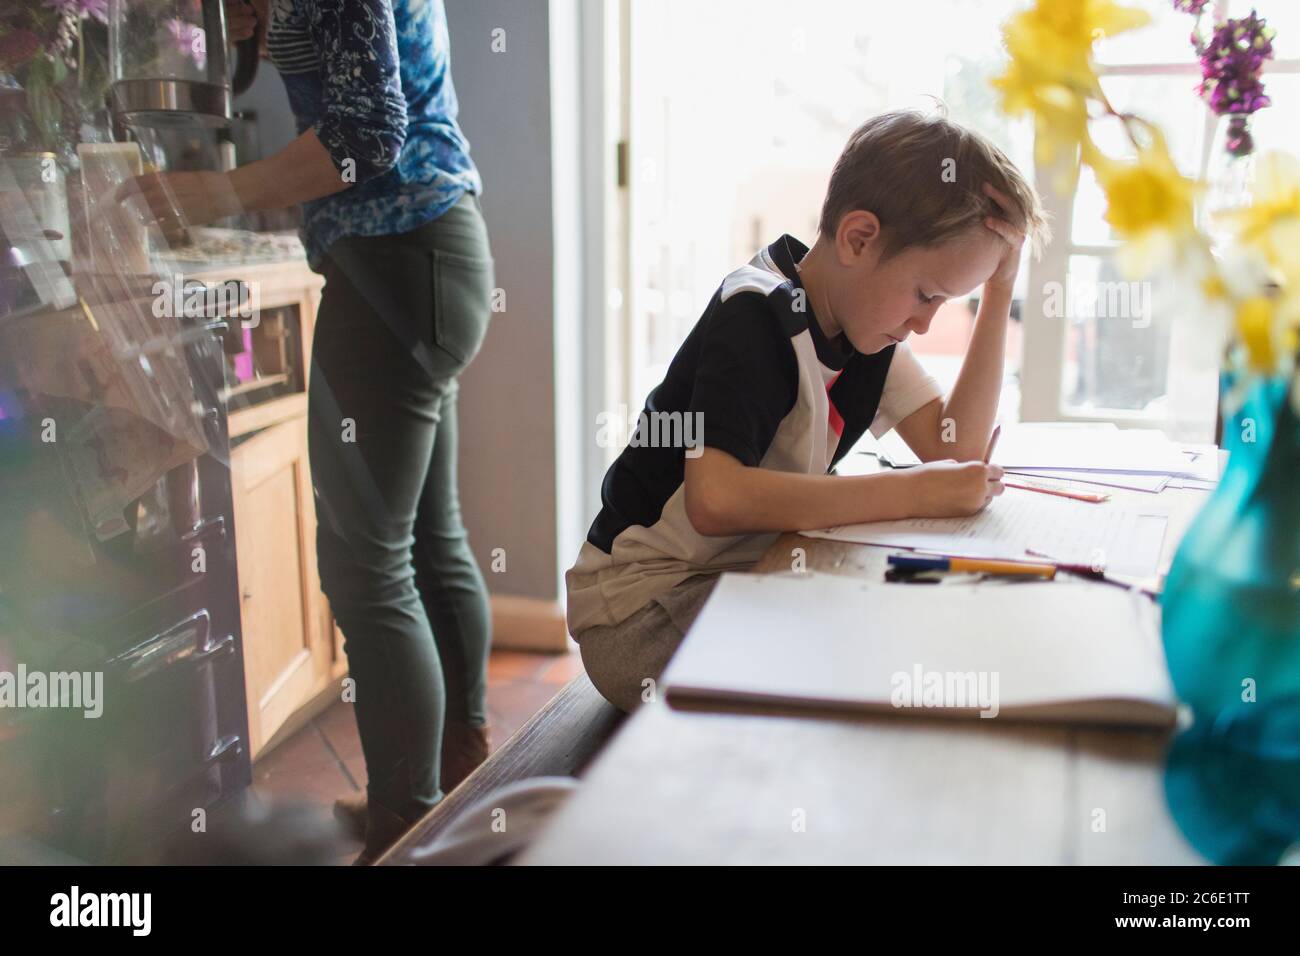 Focused boy homeschooling at kitchen table Stock Photo